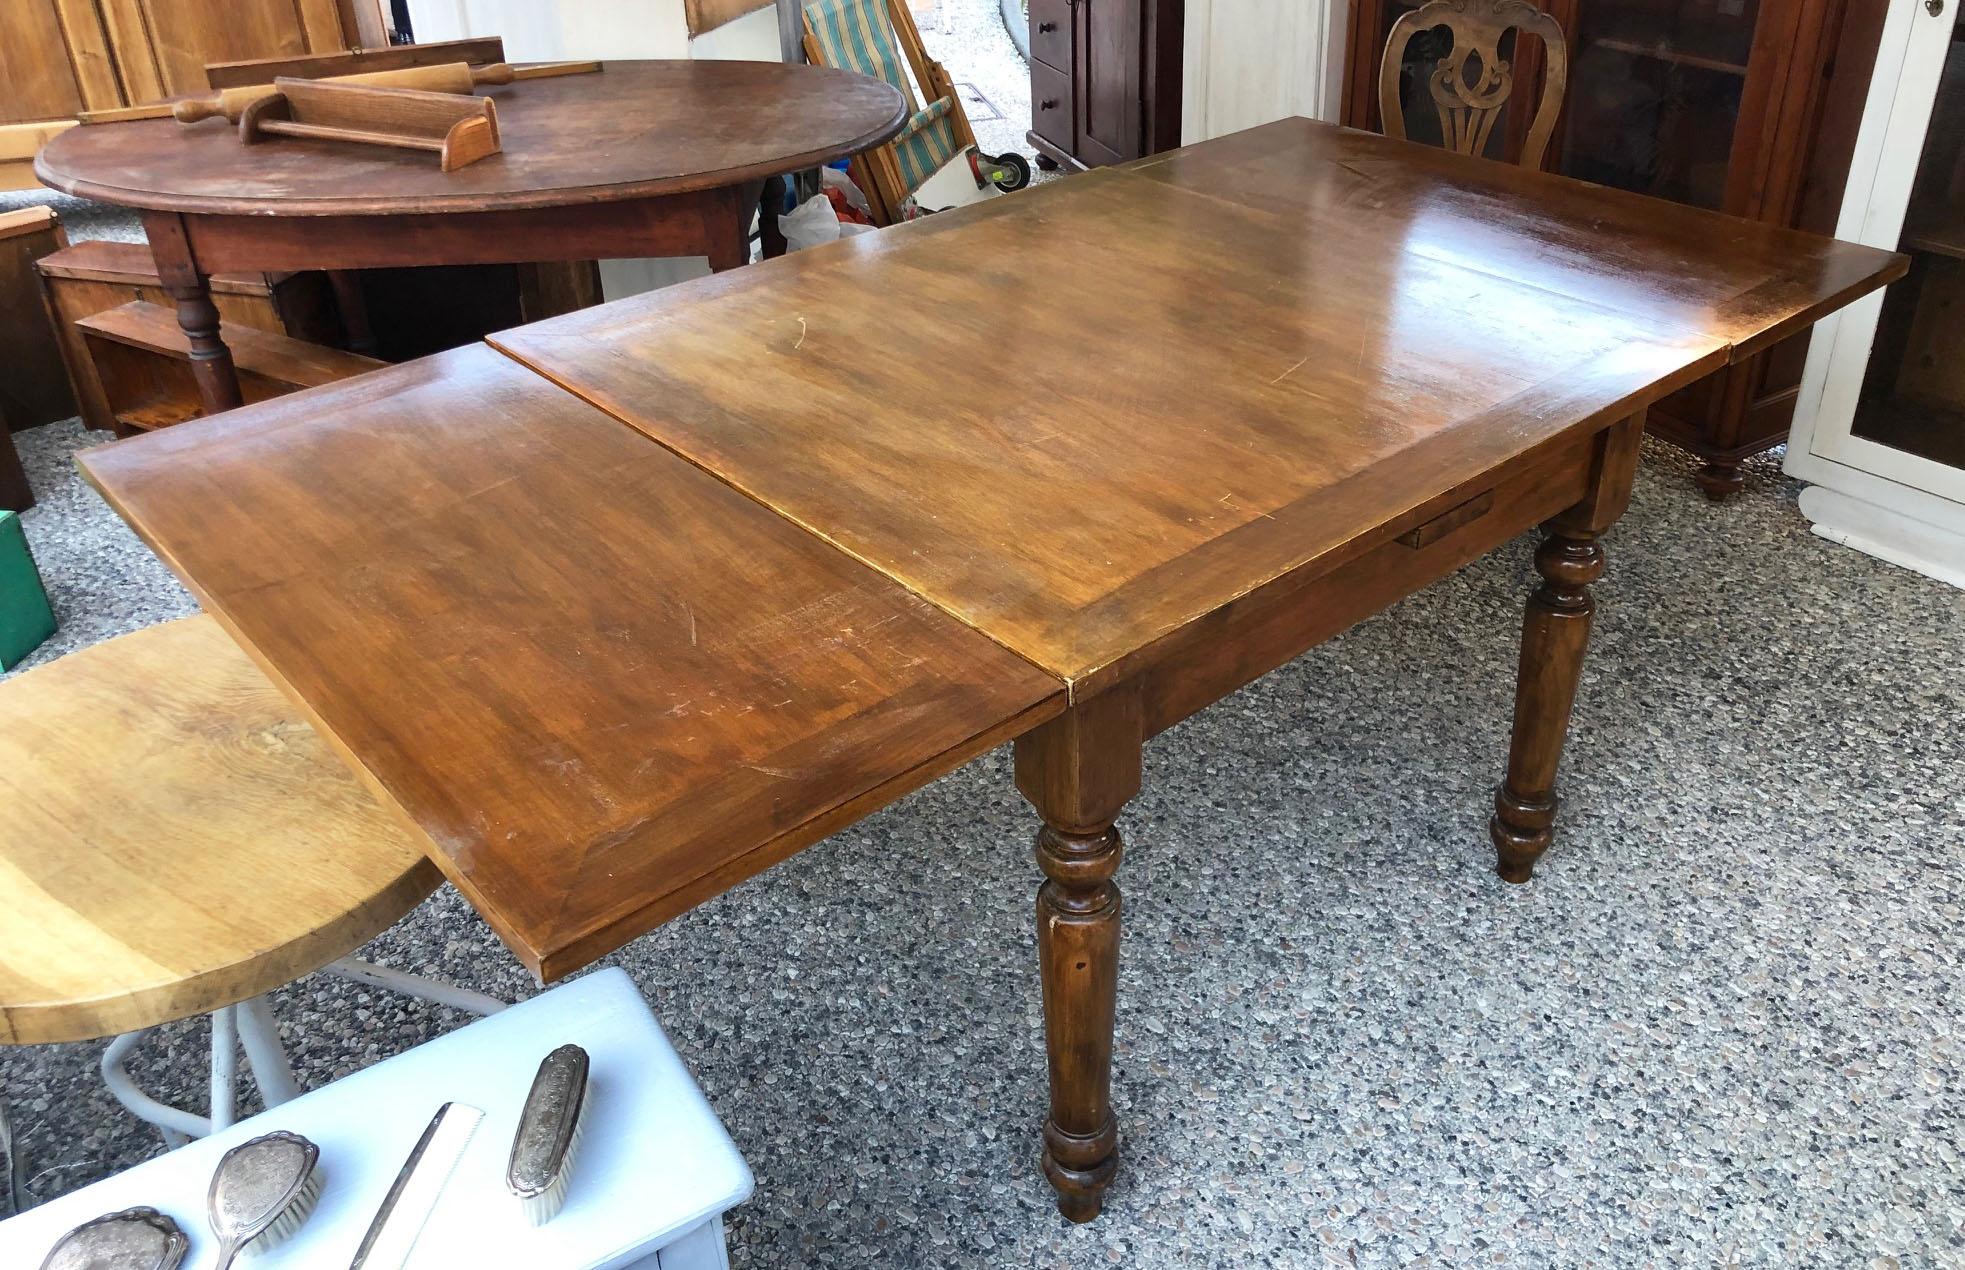 1950s Walnut table, original Italian, square, extendable, with turned leg.
The top is veneered, the legs are in solid walnut.
Original paint
The size are:
closed 109 x 109 x 82 H
open 205 x 109 x 82 H.
Comes from an old country house in the